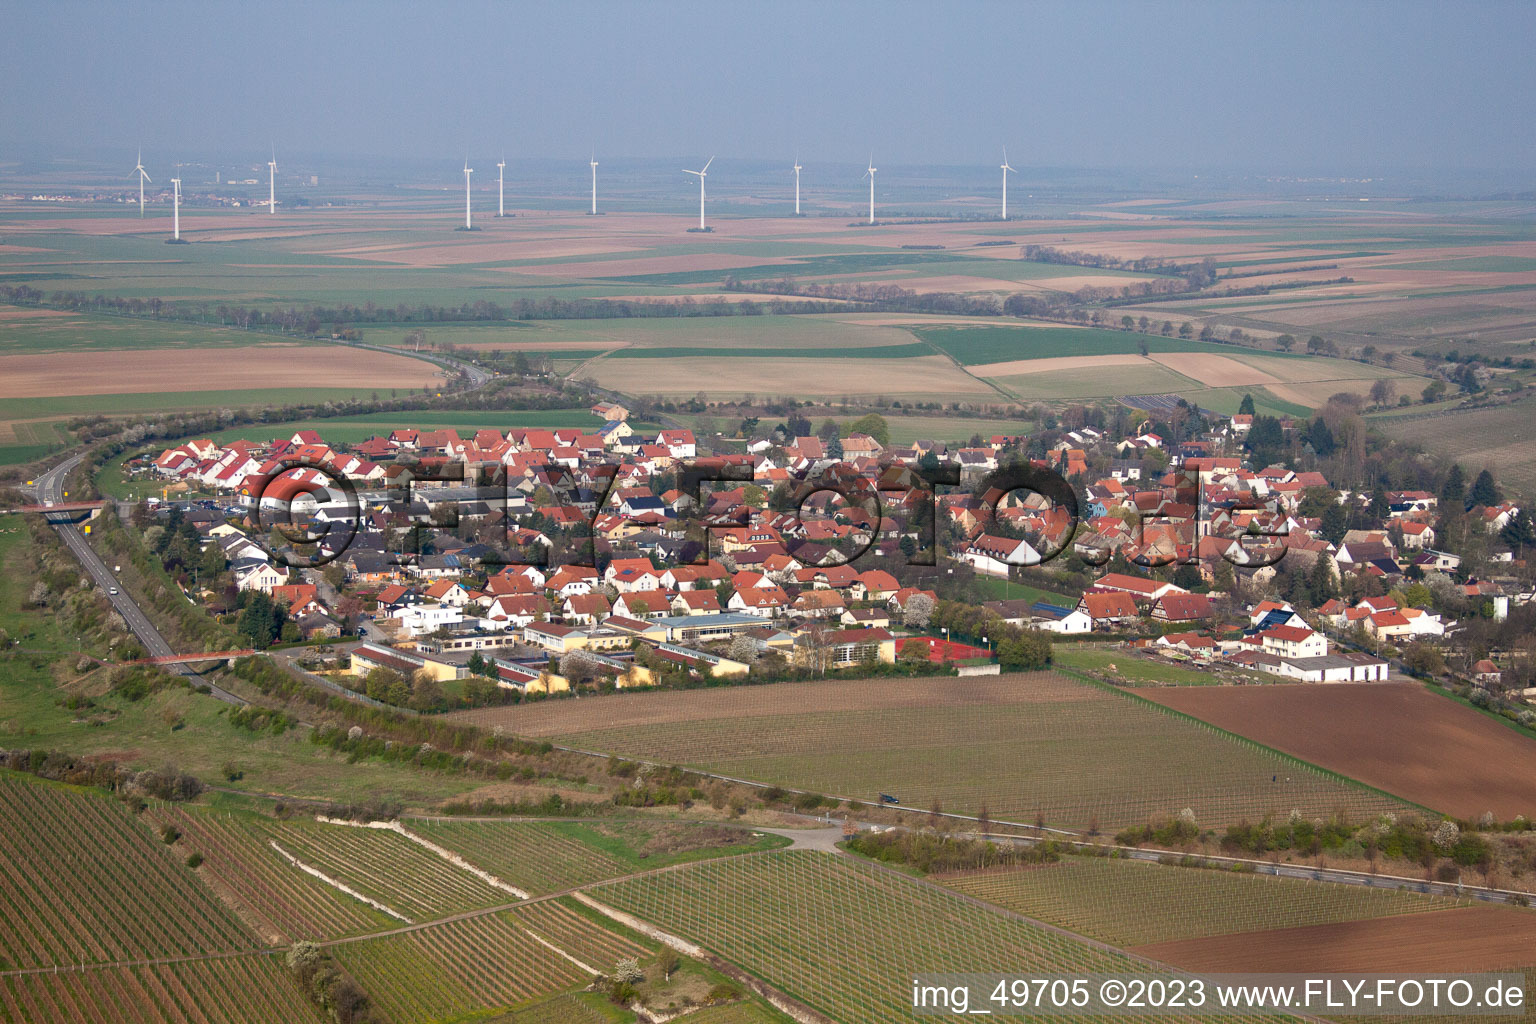 Eppelsheim in the state Rhineland-Palatinate, Germany seen from above